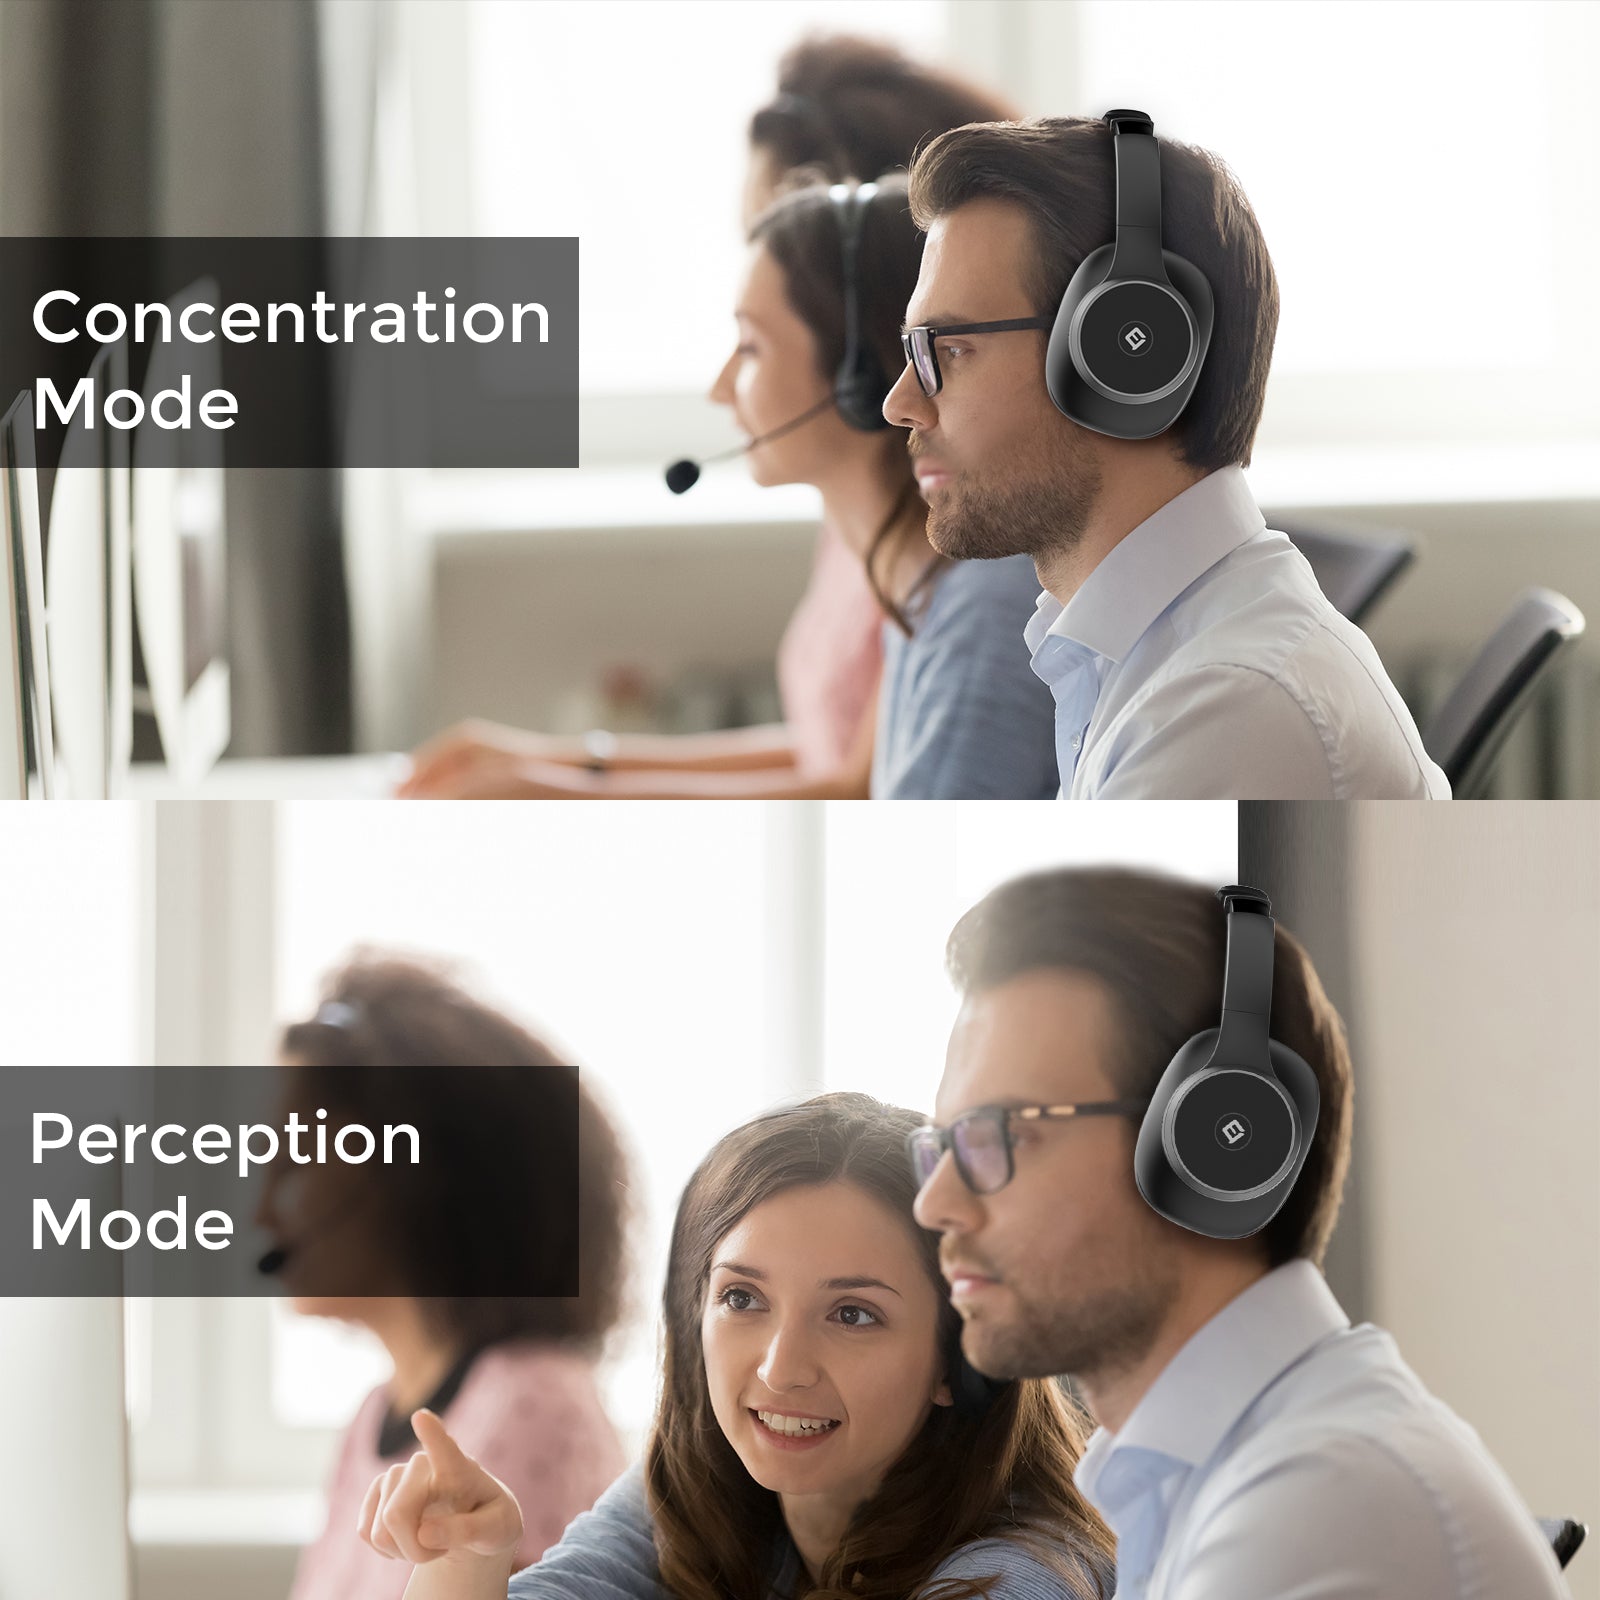 Concentration or Perception Mode